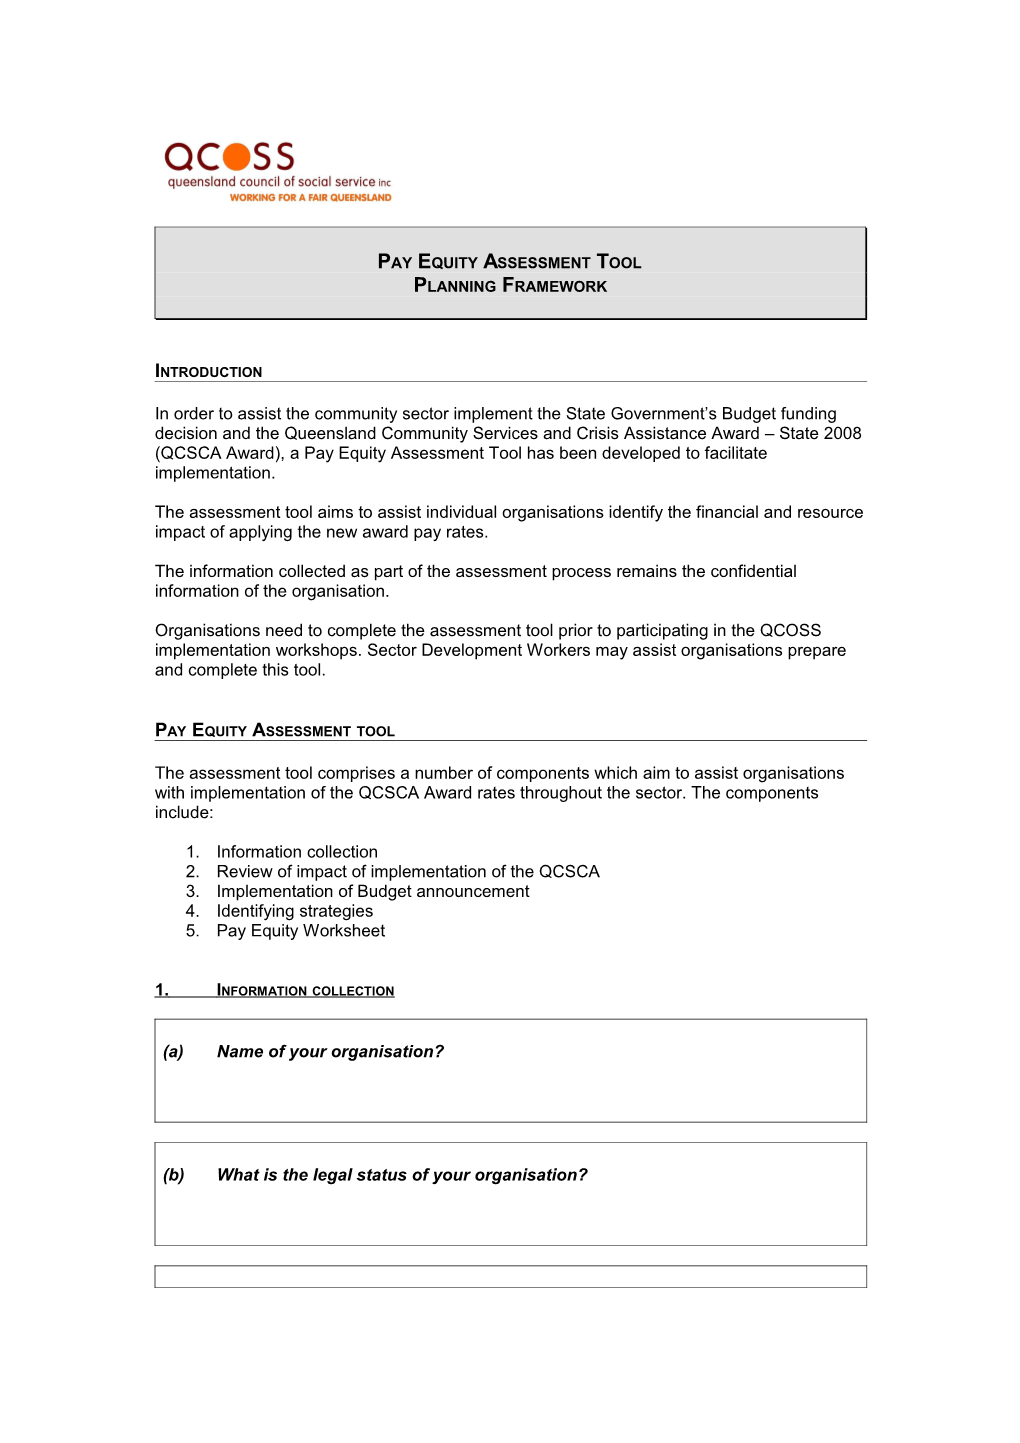 Pay Equity Assessment Tool